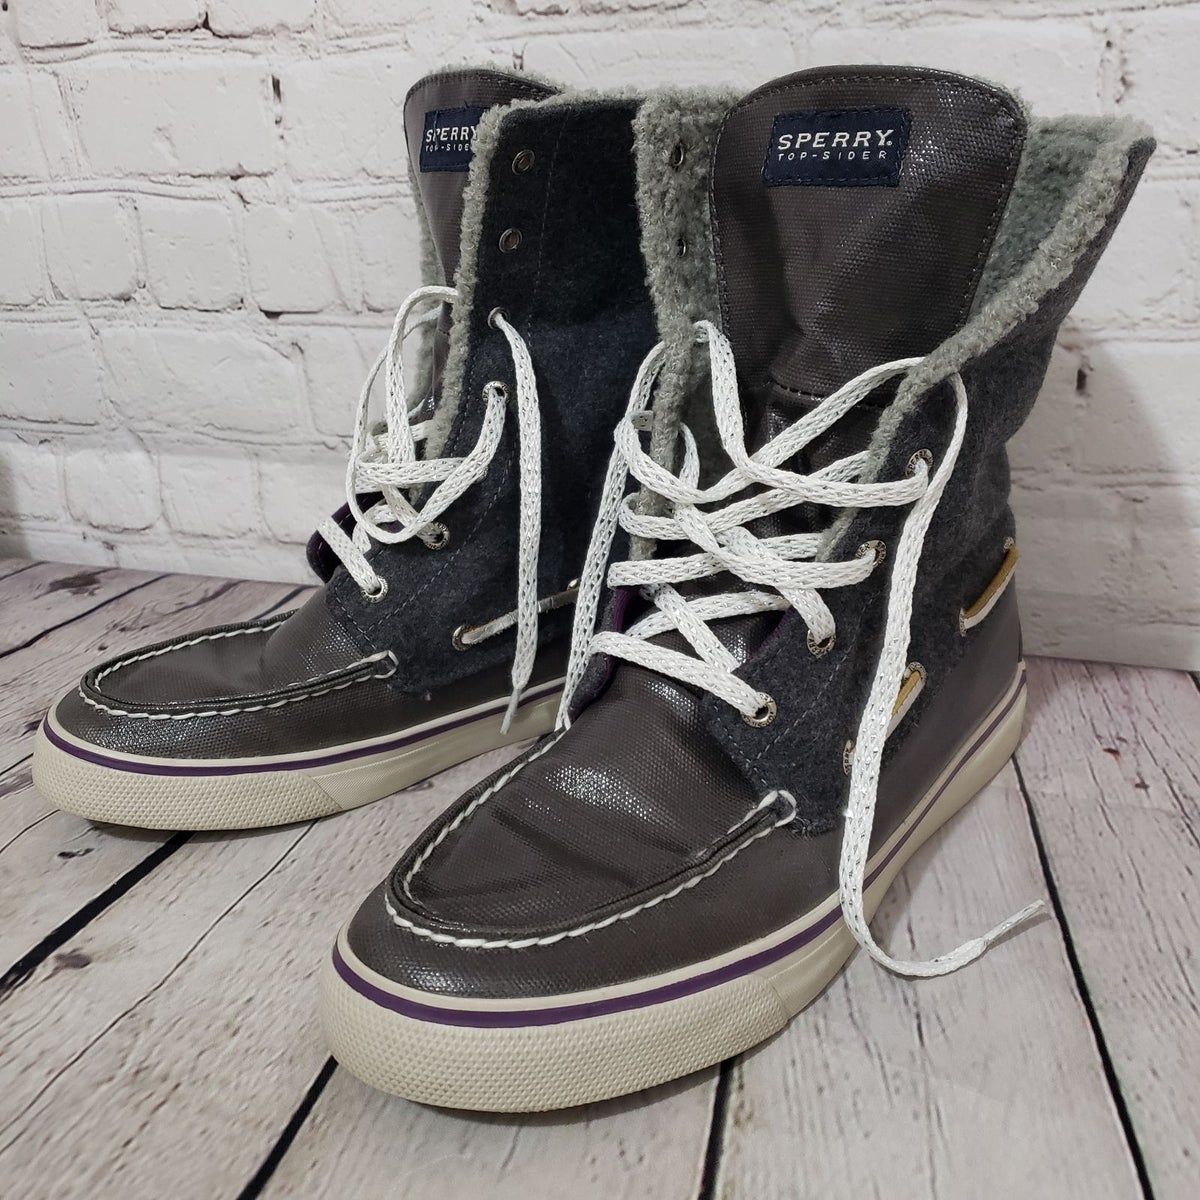 Women’s Sperry Top-Sider Boots size 8.5